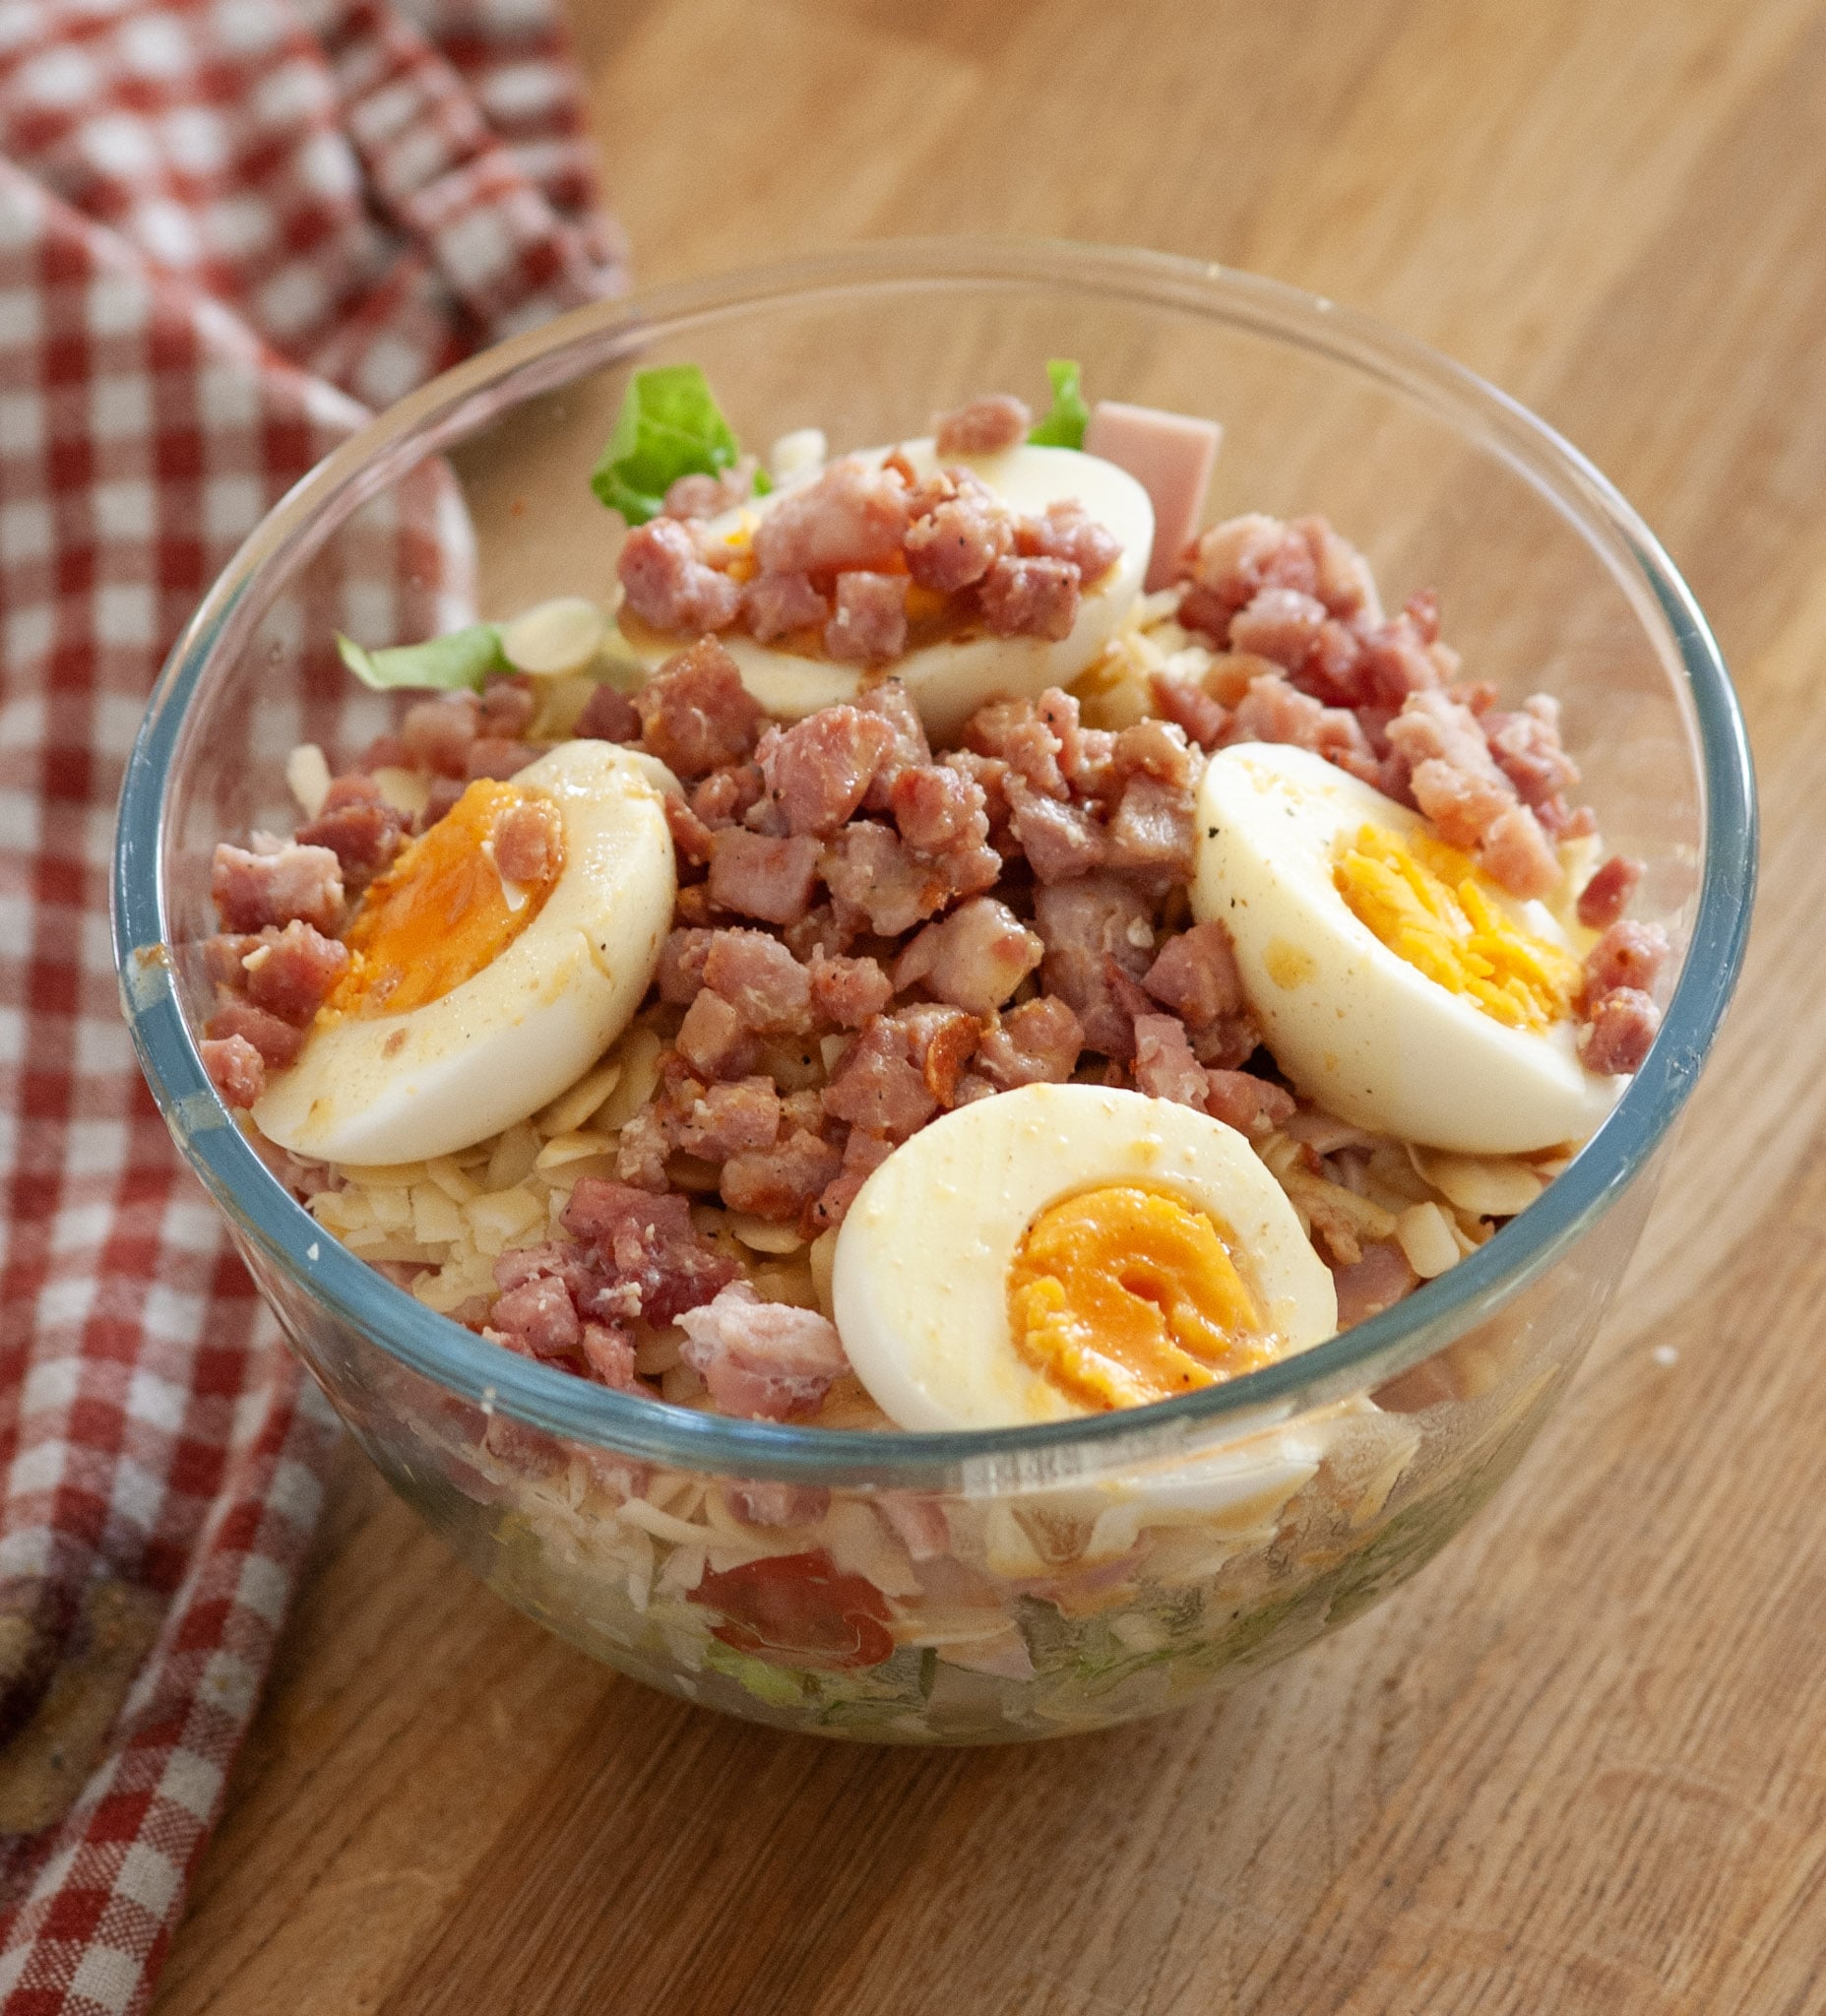 A small bowl of salad with eggs and bacon bits